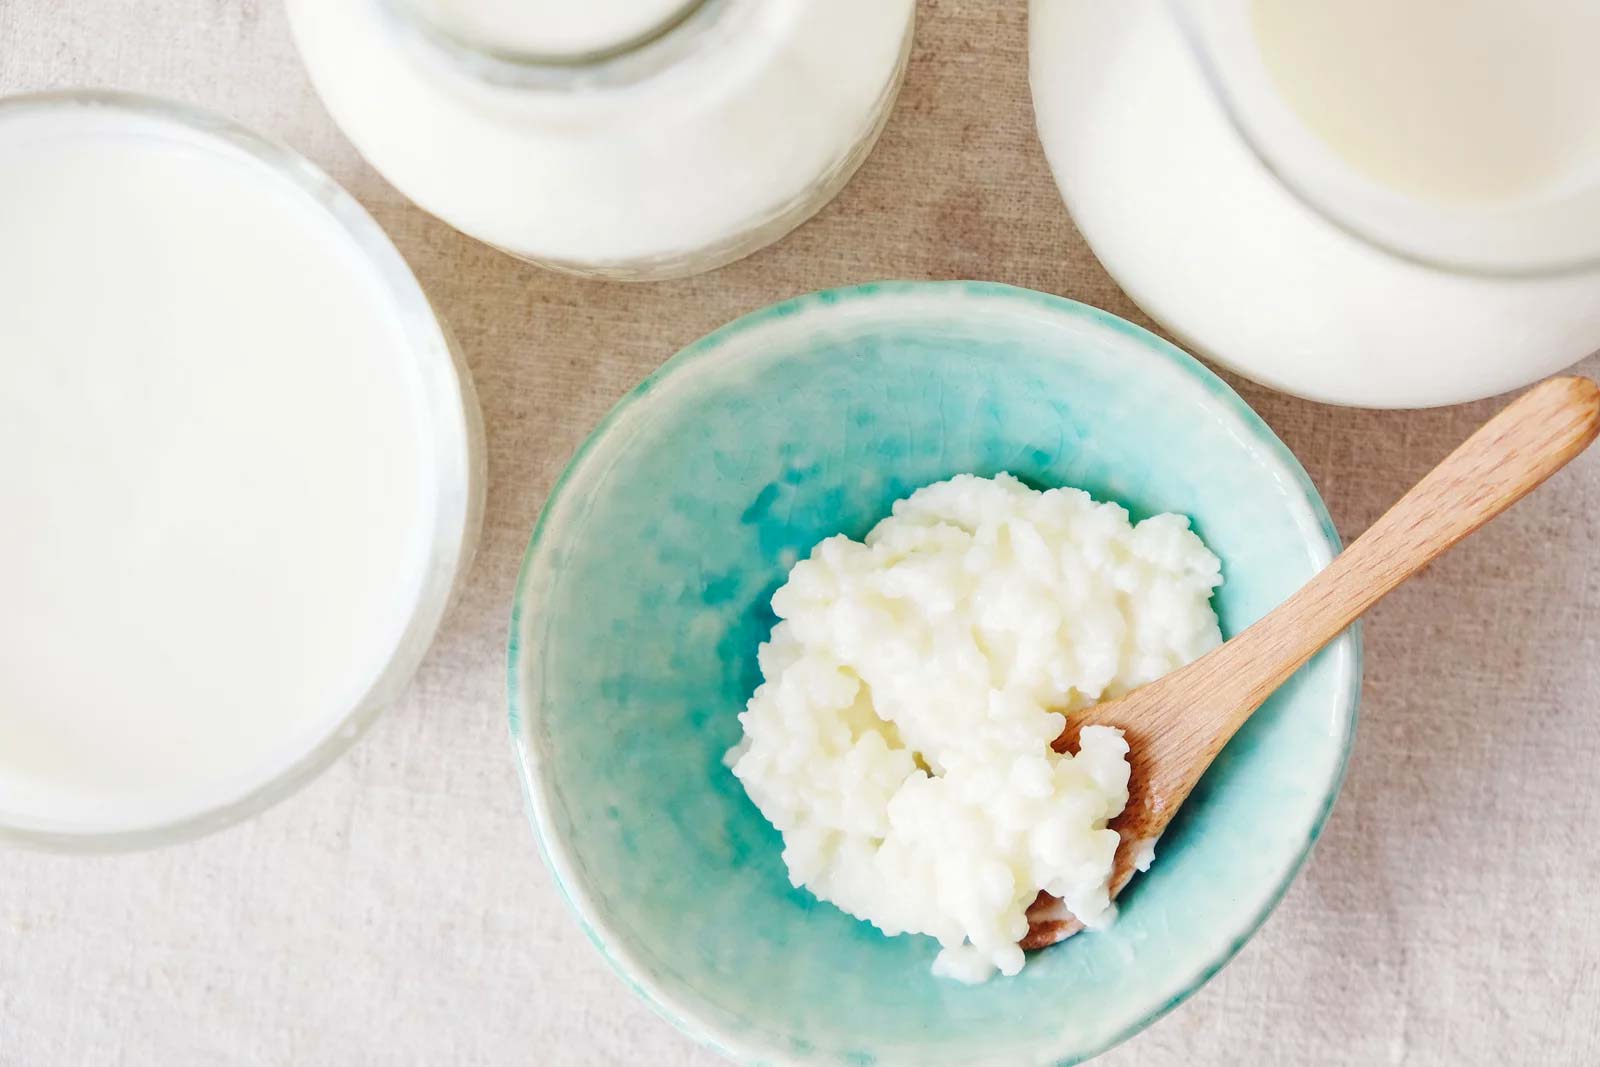 If You Have at Least 12/23 of These Foods in Your Kitchen, You’re Officially Middle-Class Kefir